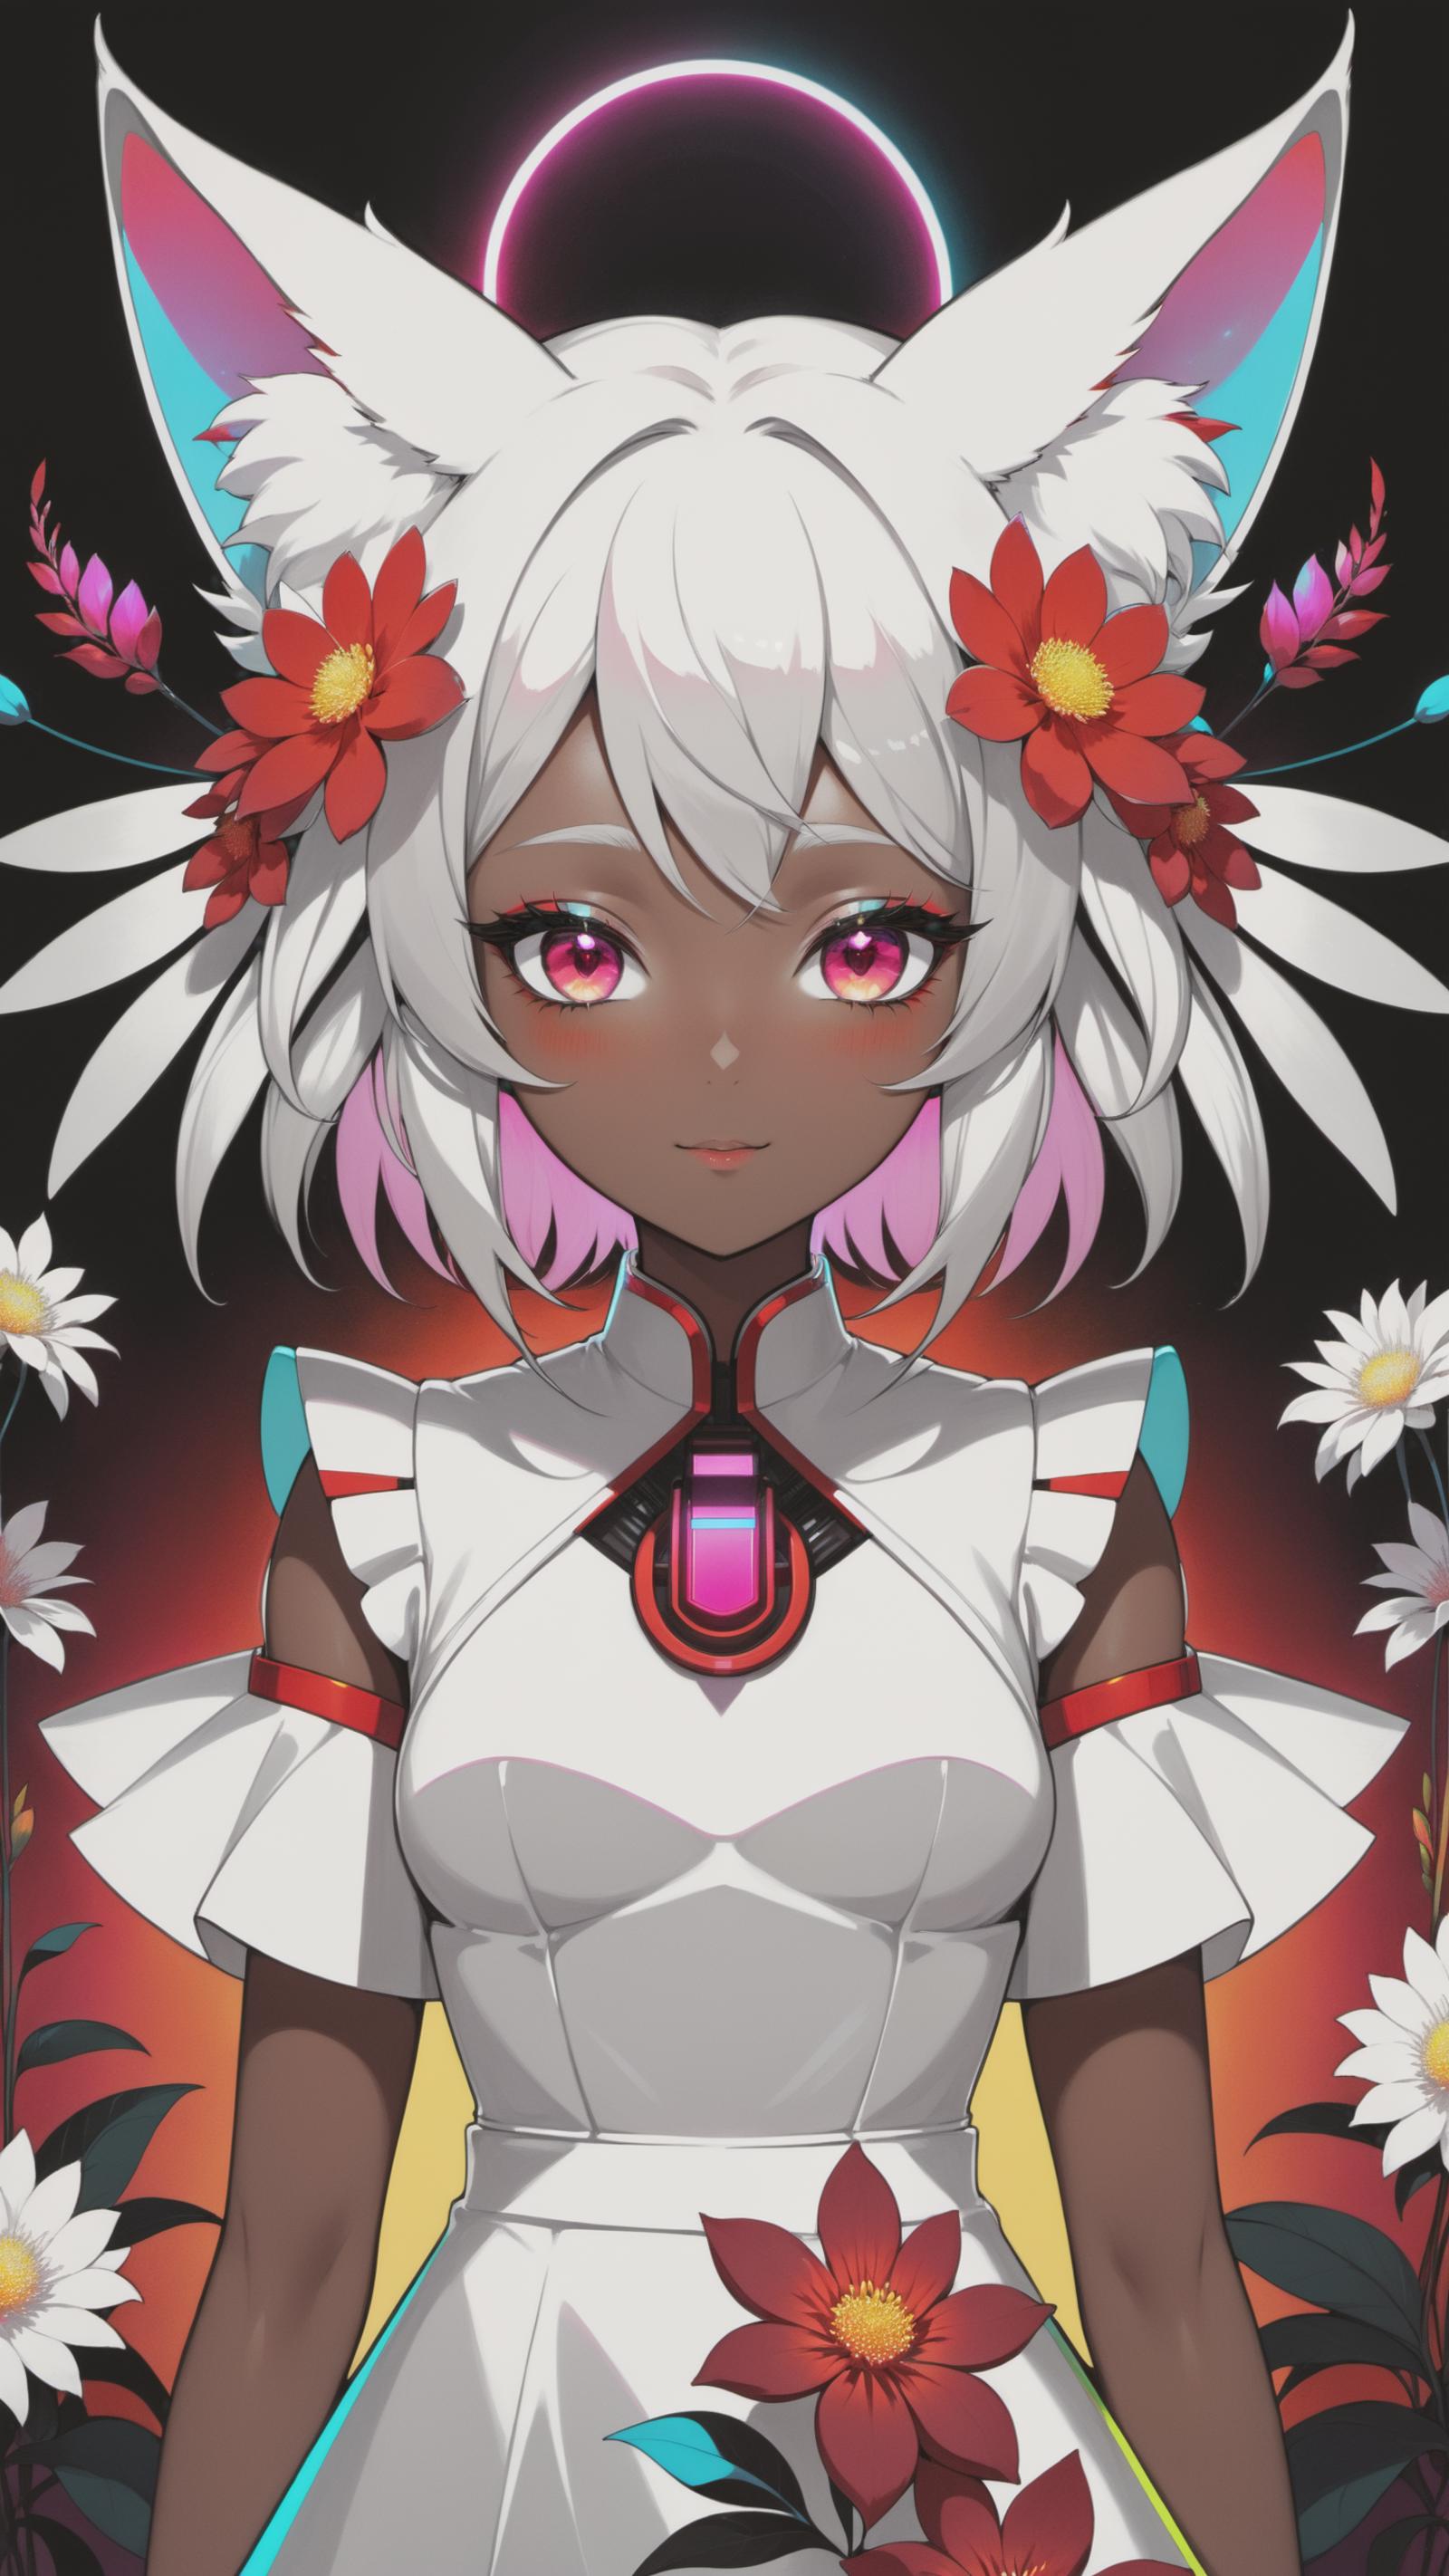 Anime Characters with White and Pink Hair, Flower Decorations, and Red Eyes.